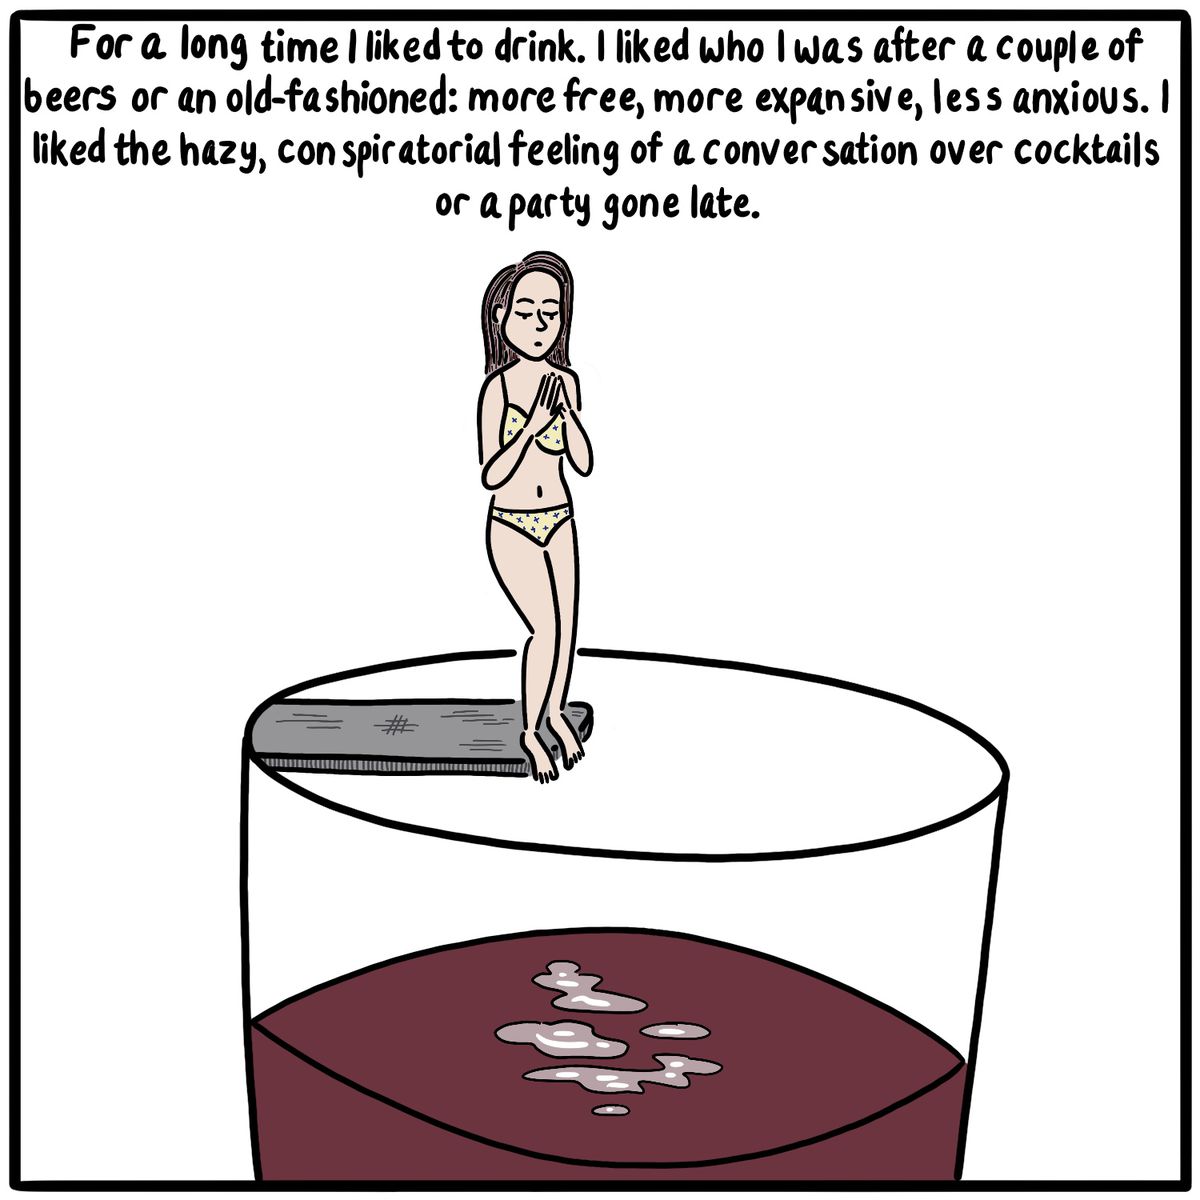 Woman in a swimsuit poised to dive into a large wine glass. Caption reads “For a long time I liked to drink. I liked who I was after a couple of beers or an old-fashioned: more free, more expansive, less anxious. I liked the hazy, conspiratorial feeling of a conversation over cocktails or a party gone late.”